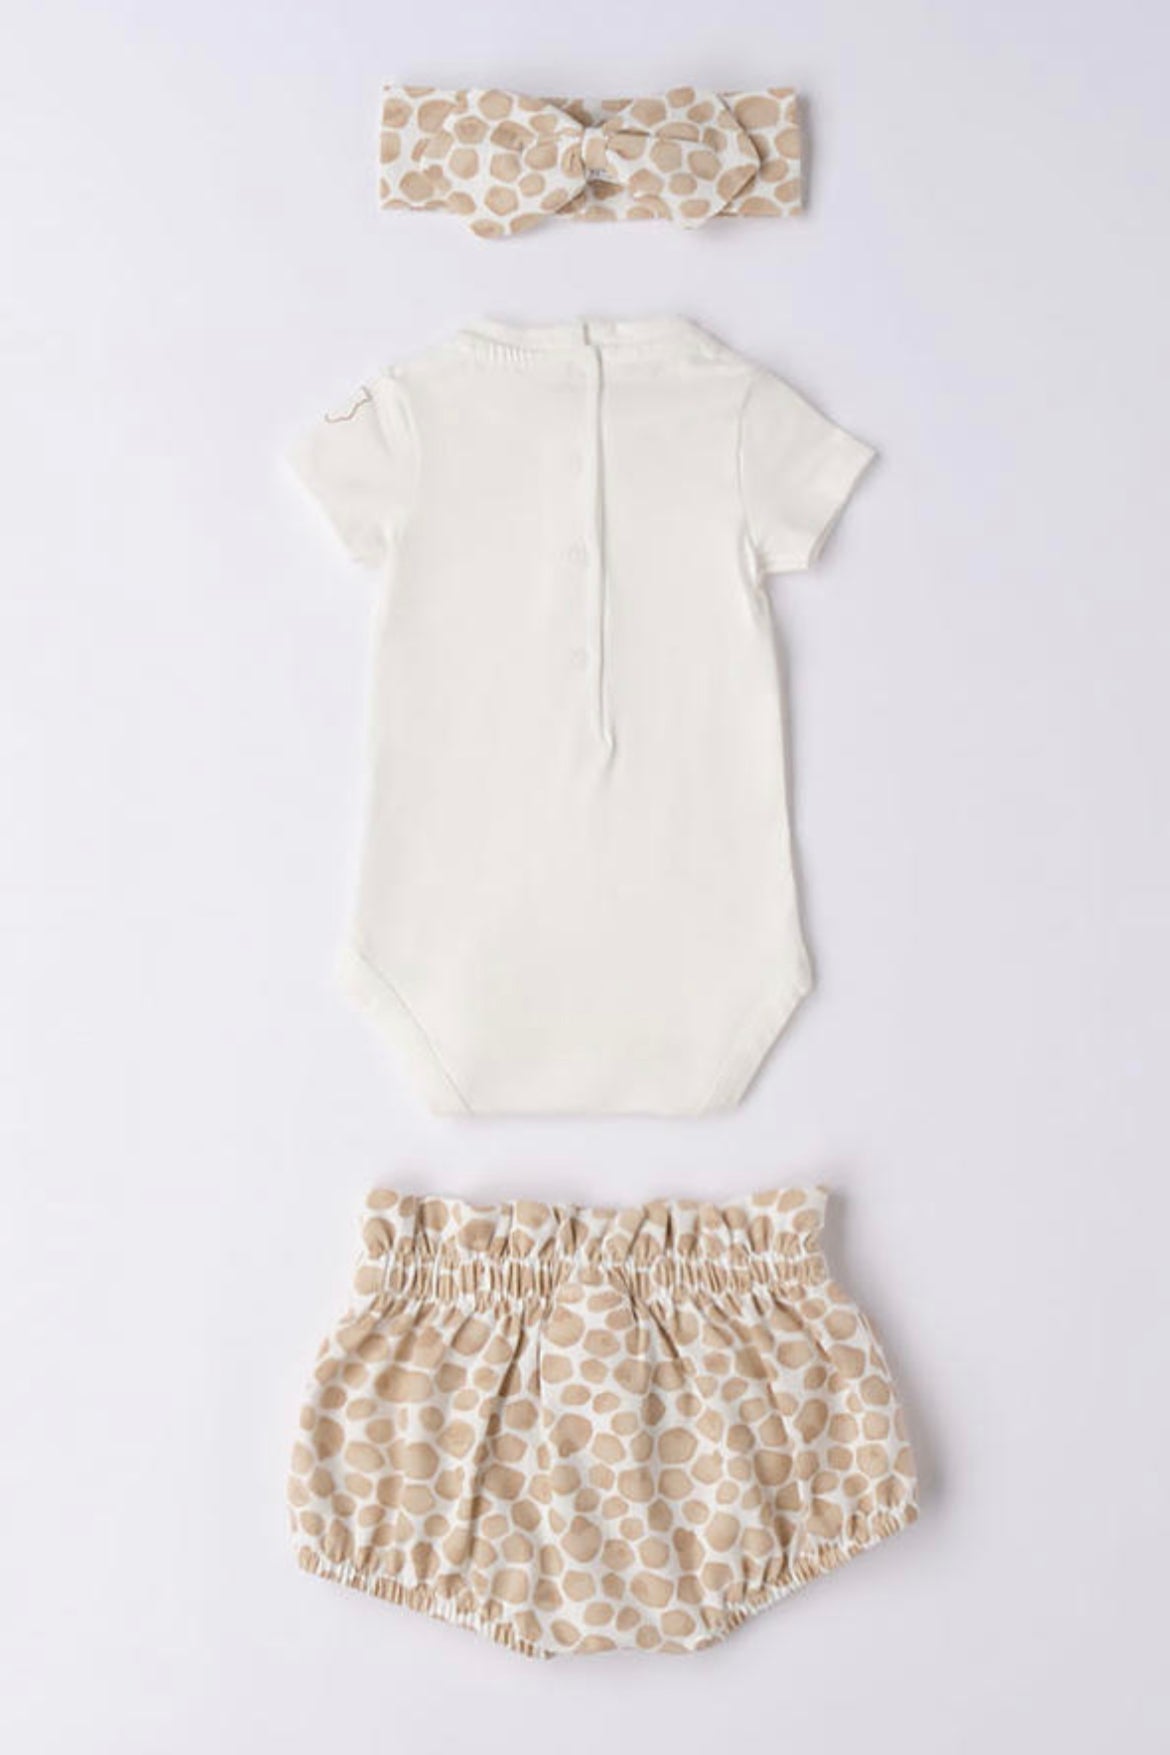 Minibanda Baby Girl Ivory & Tan 3 Piece Outfit